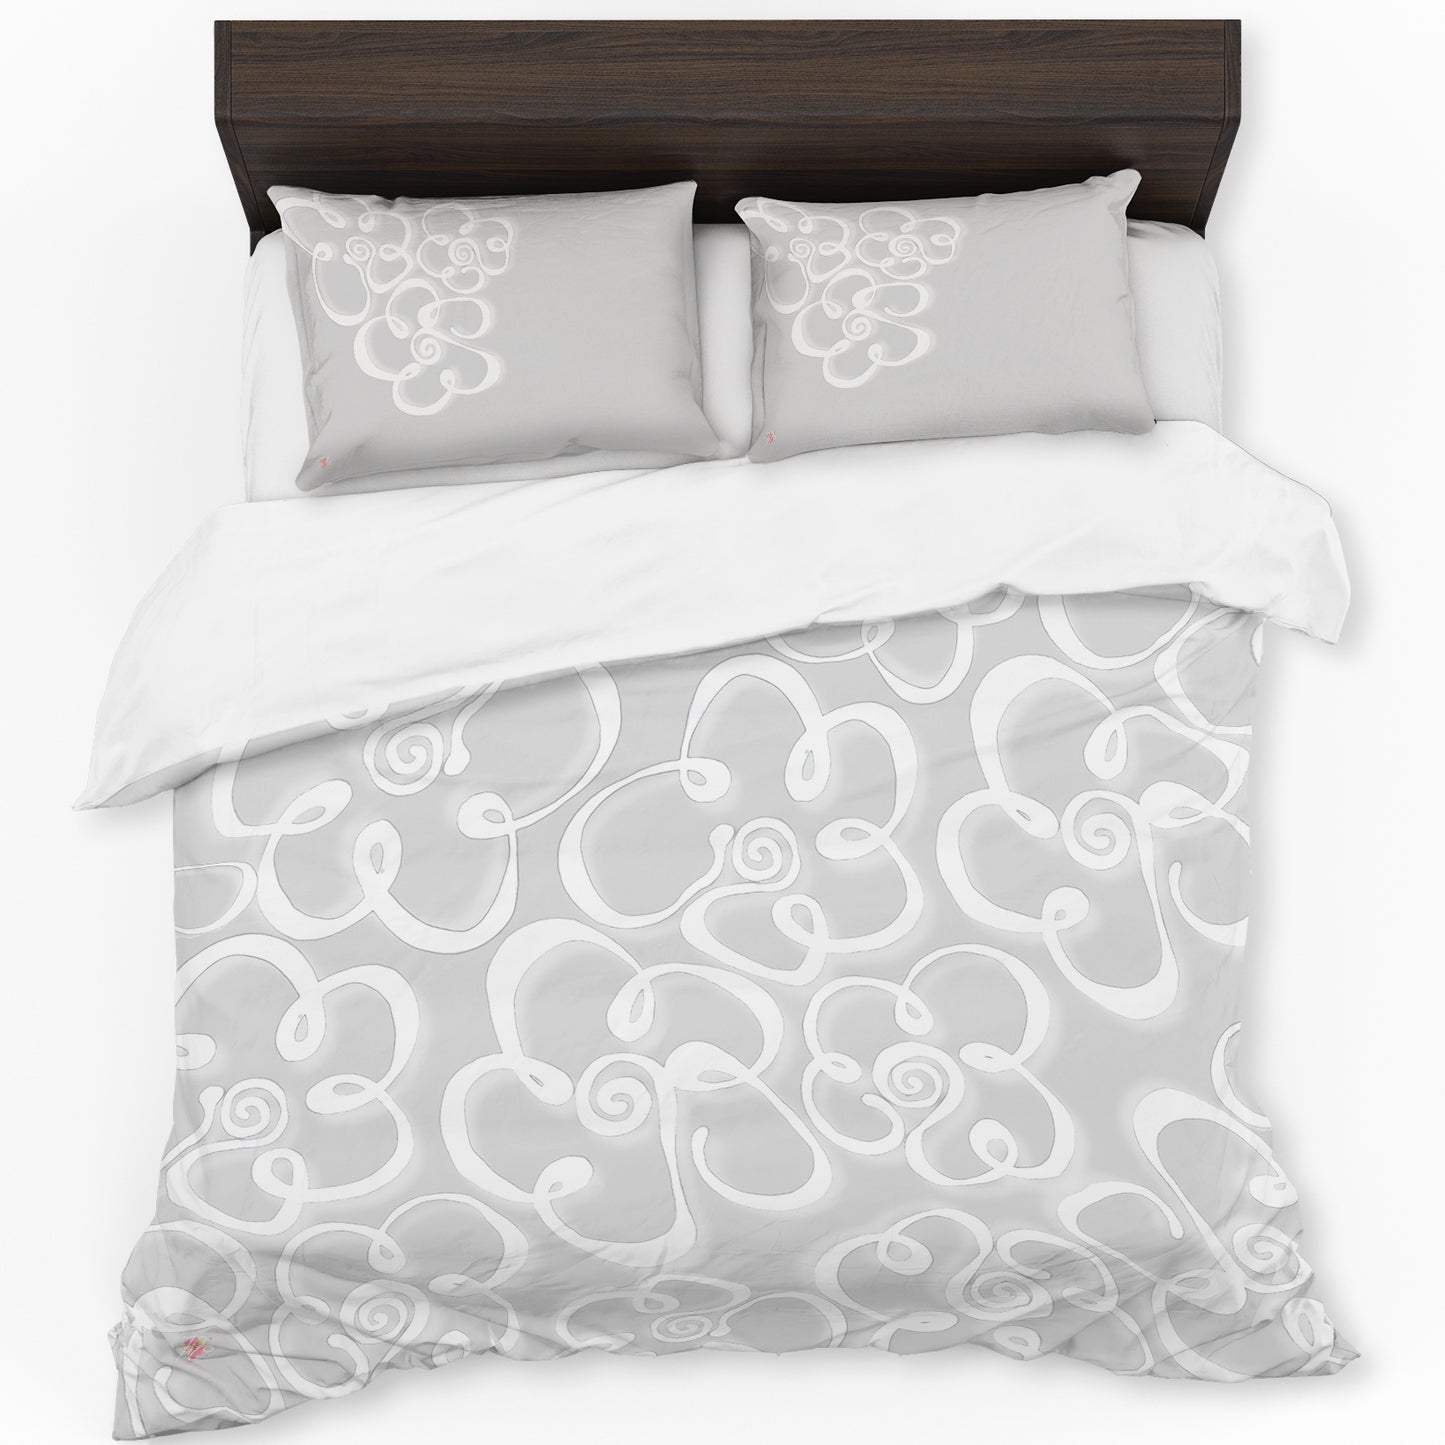 Daisies on Pale Grey Duvet Cover Set By Fifo